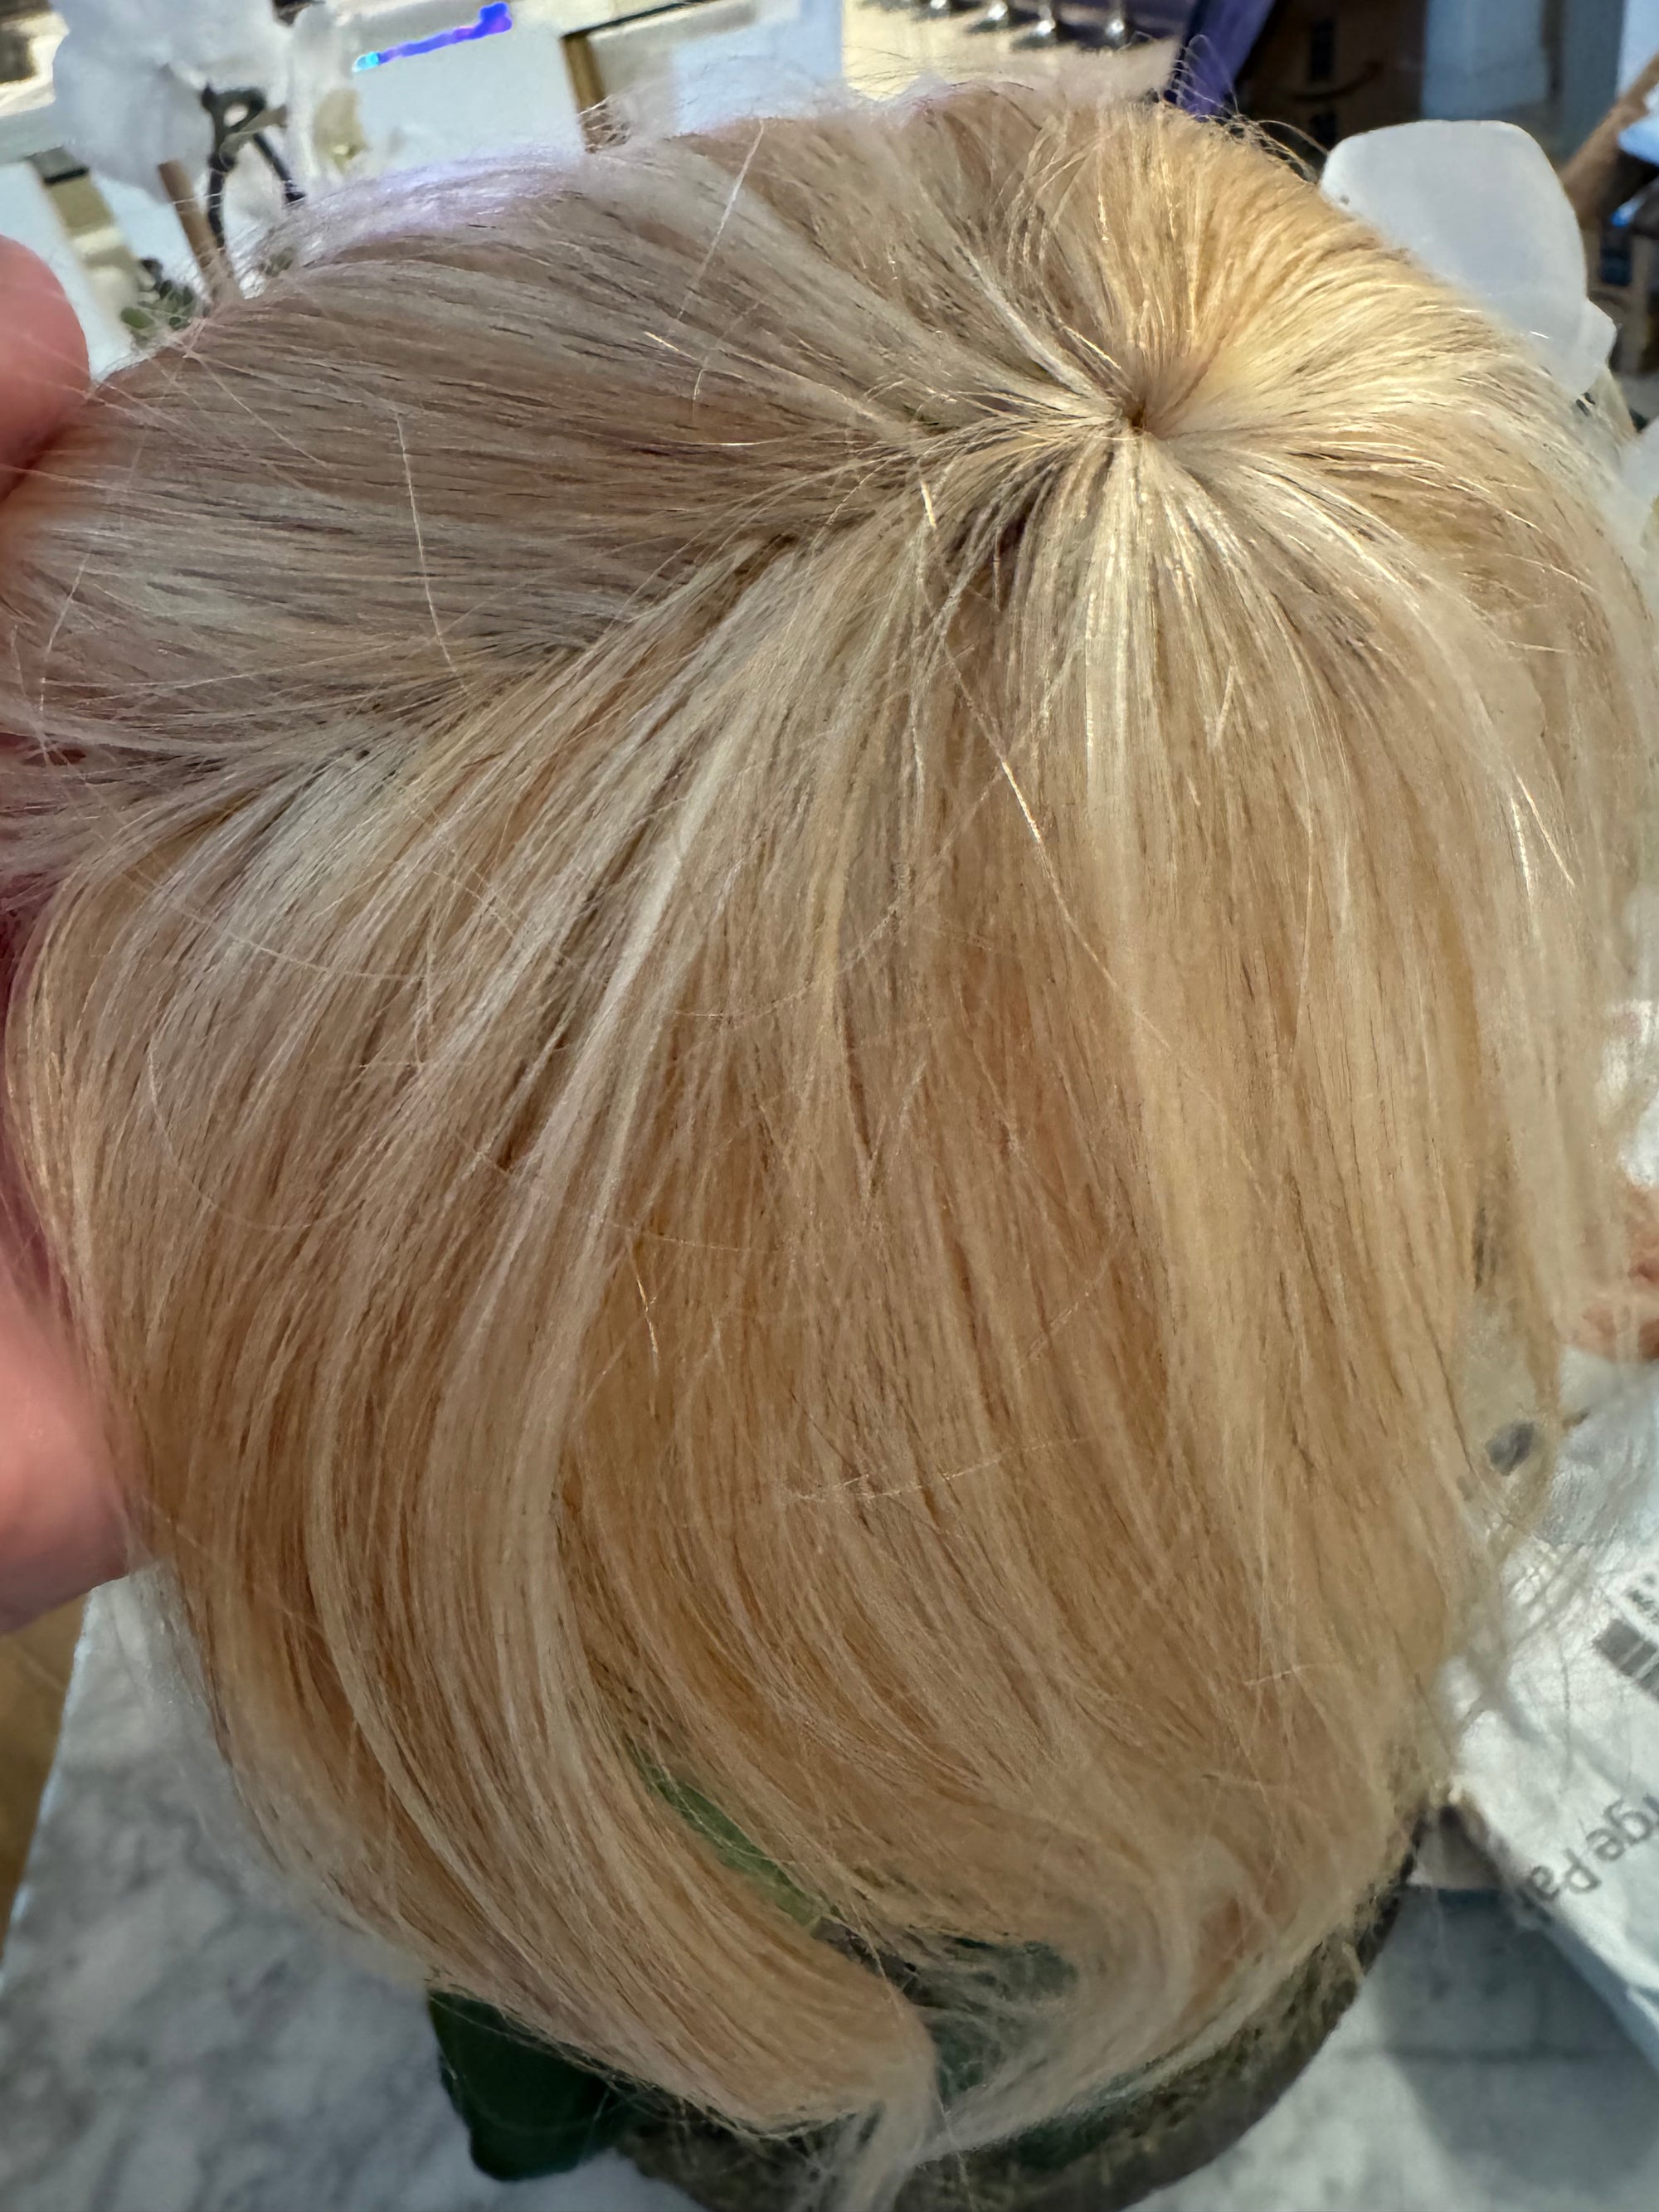 Tillstyle top hair piece 100%human hair platinum blonde highlighted clip in hair toppers for thinning crown